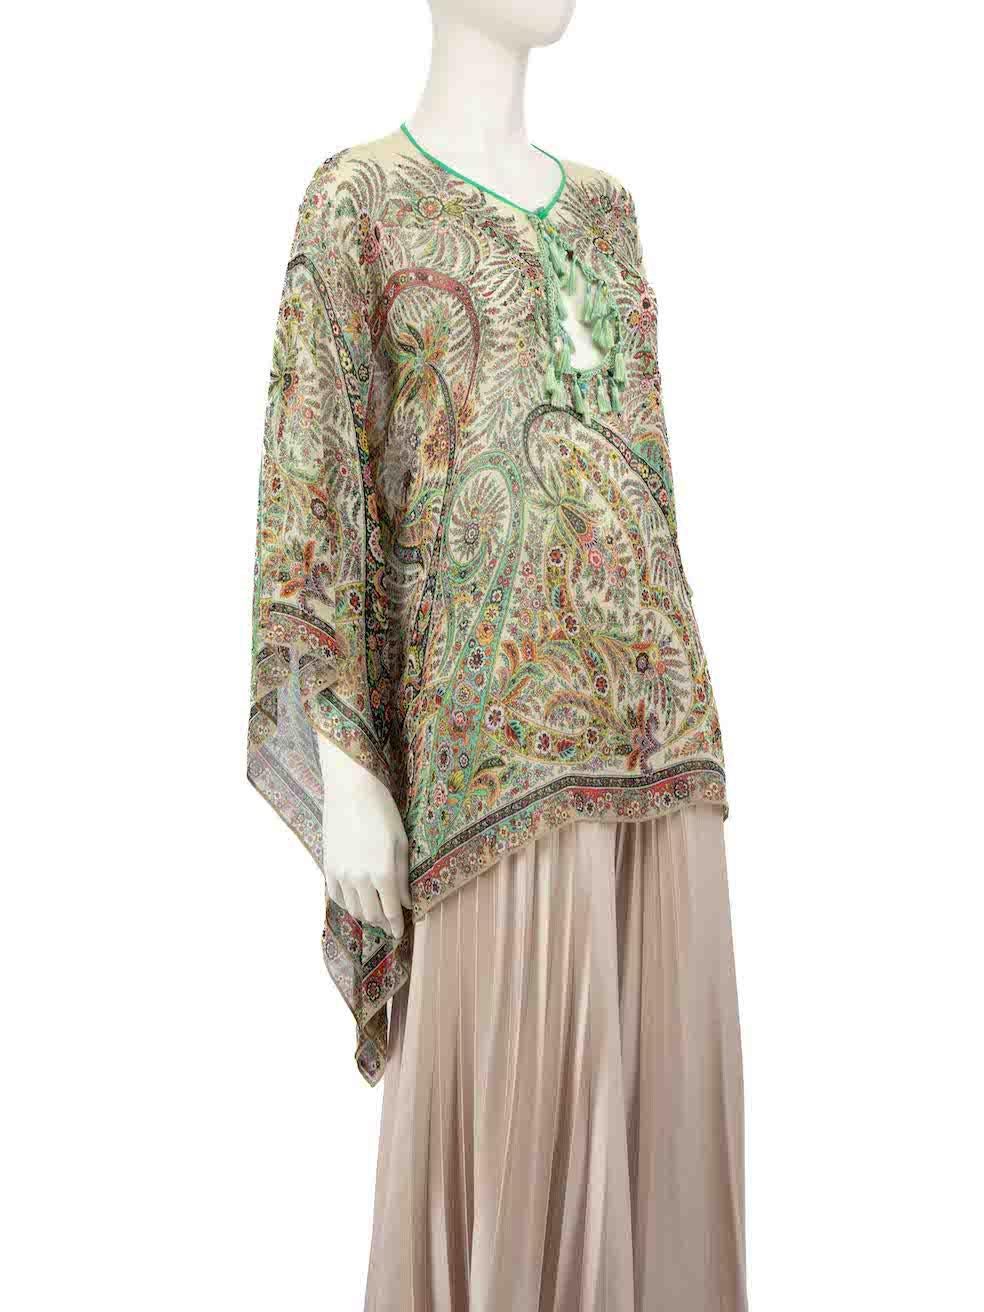 CONDITION is Very good. Hardly any visible wear to the blouse is evident on this used Etro designer resale item. Please note that this item does not come with a size label.
 
 
 
 Details
 
 
 Green
 
 Silk
 
 Top
 
 Floral print
 
 Sheer
 
 Long